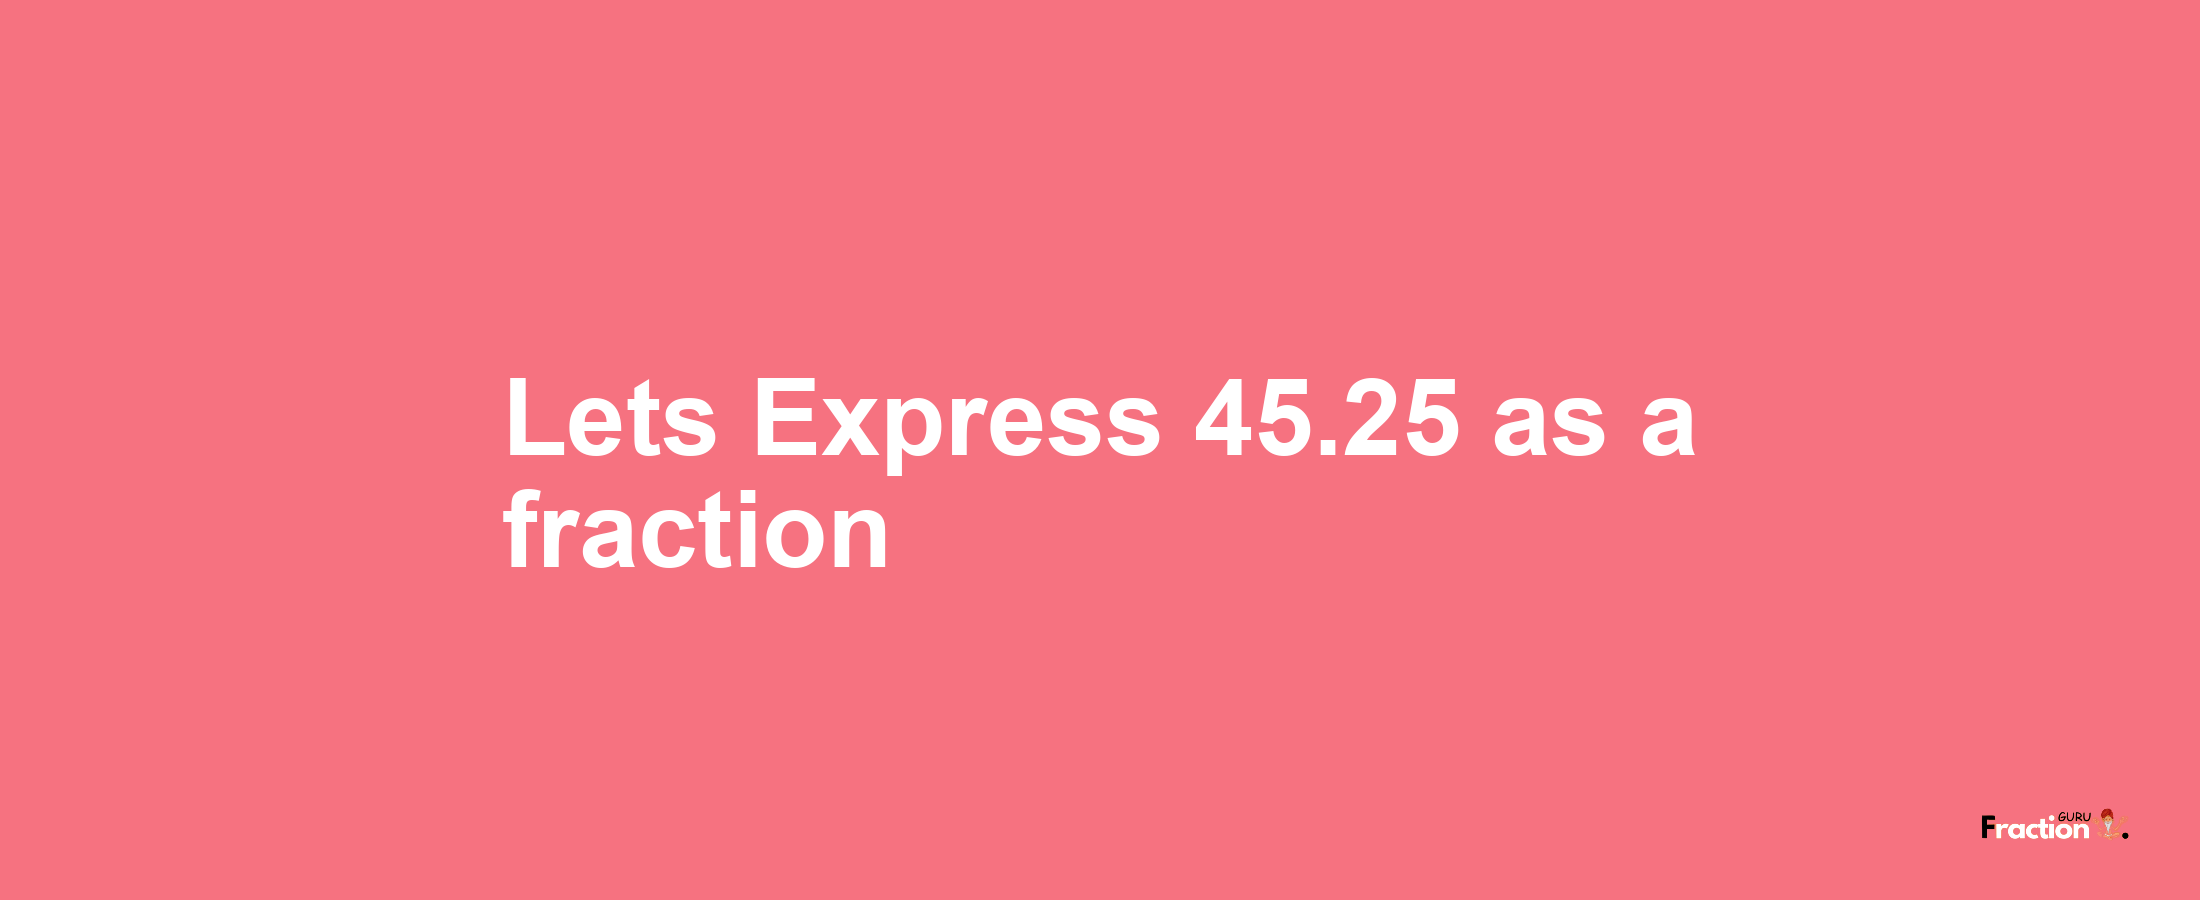 Lets Express 45.25 as afraction